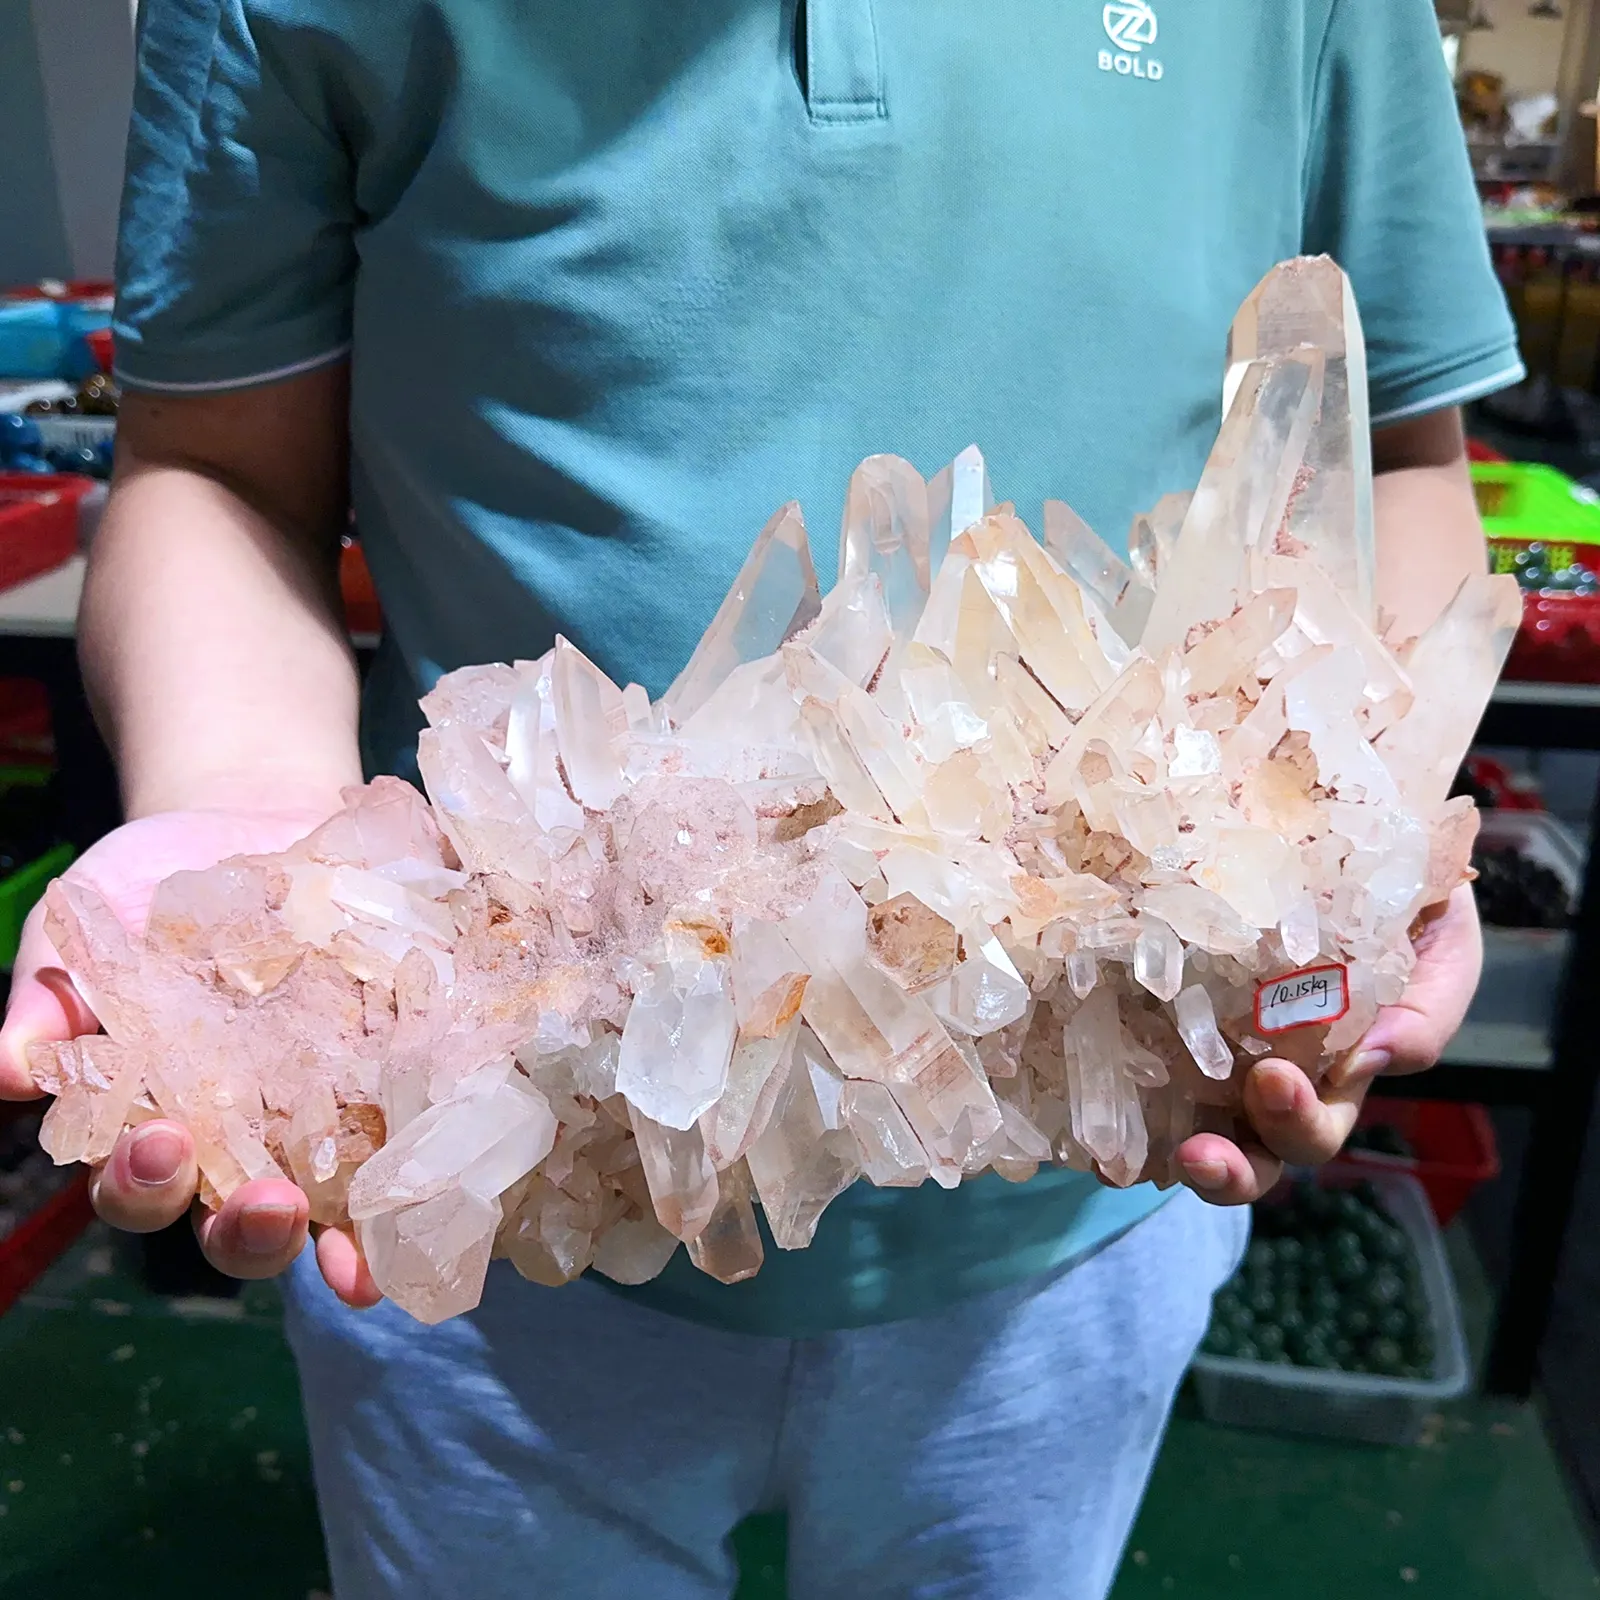 Wholesale Natural Healing White Quartz Cluster Large Clear Crystal Bulk Stone Geodes Rock carving Home Decoration